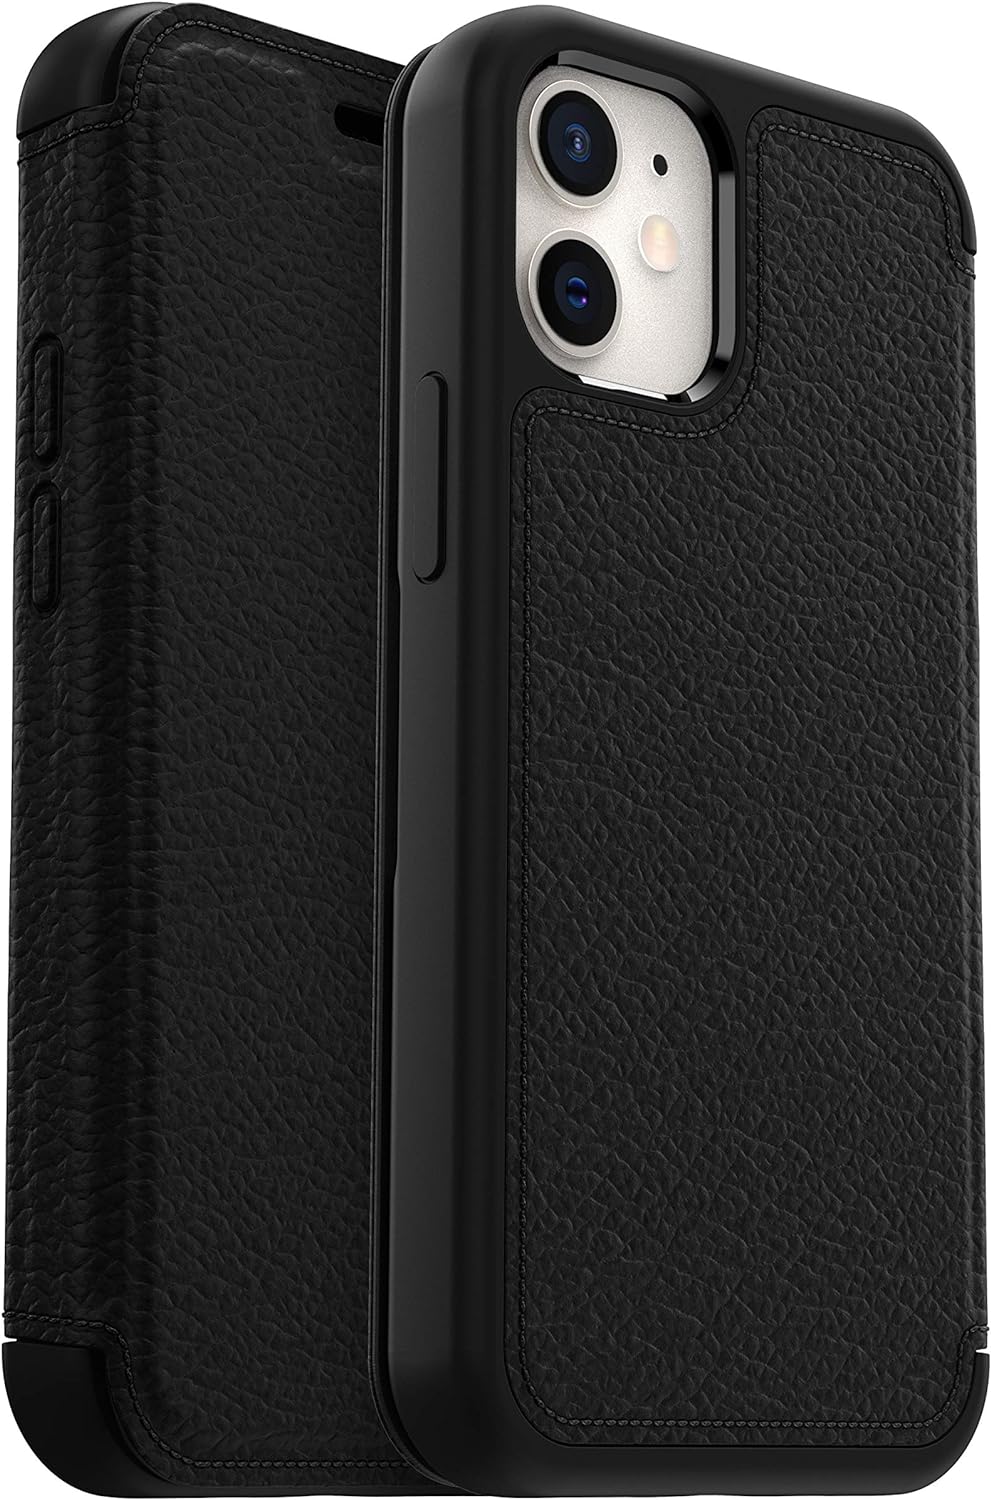 OtterBox Strada Case for iPhone 12 mini, Shockproof, Drop proof, Premium Leather Protective Folio with Two Card Holders, 3x Tested to Military Standard, Black 5340